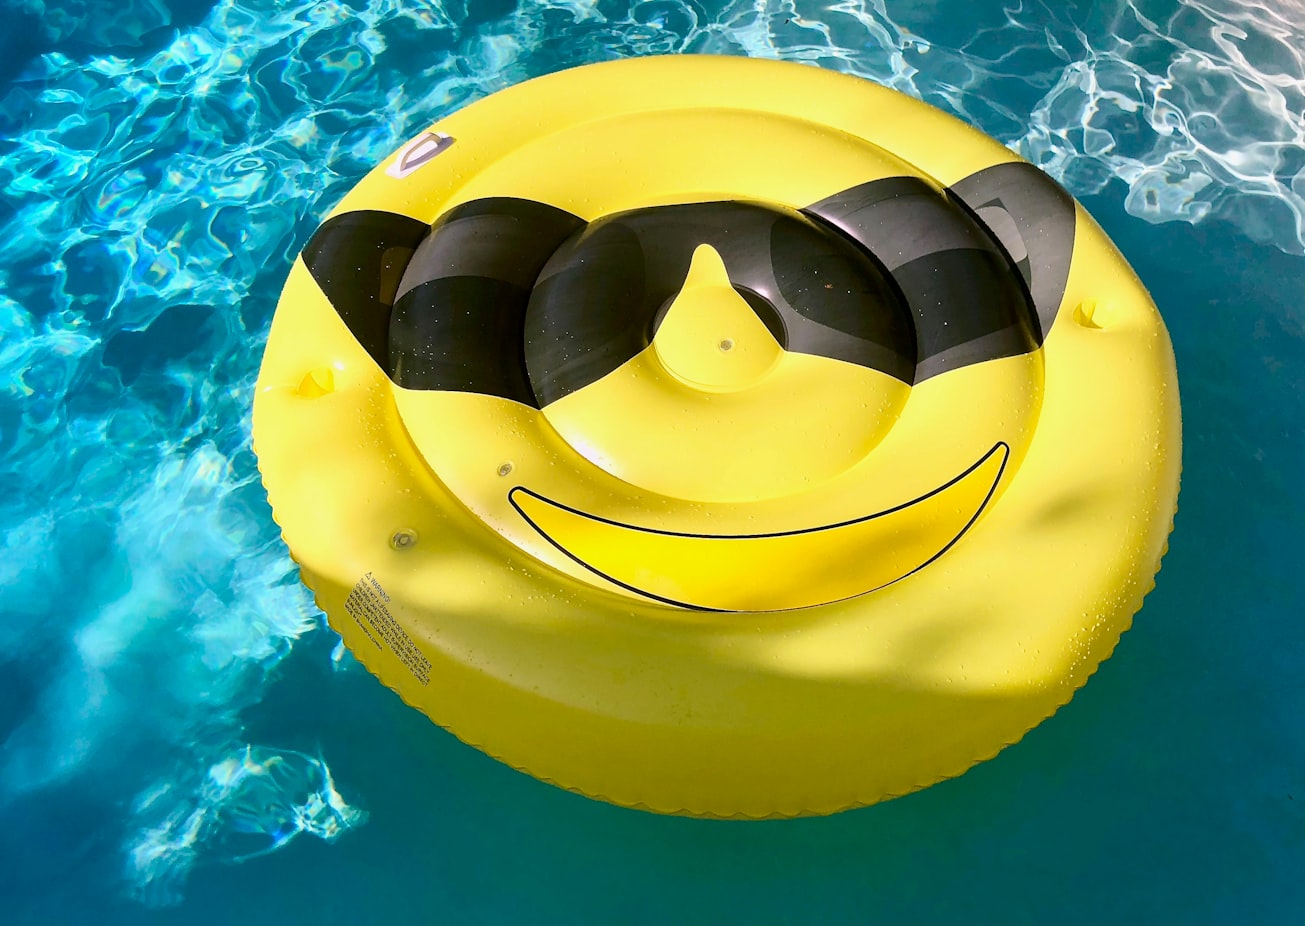 How often to change water in inflatable pool